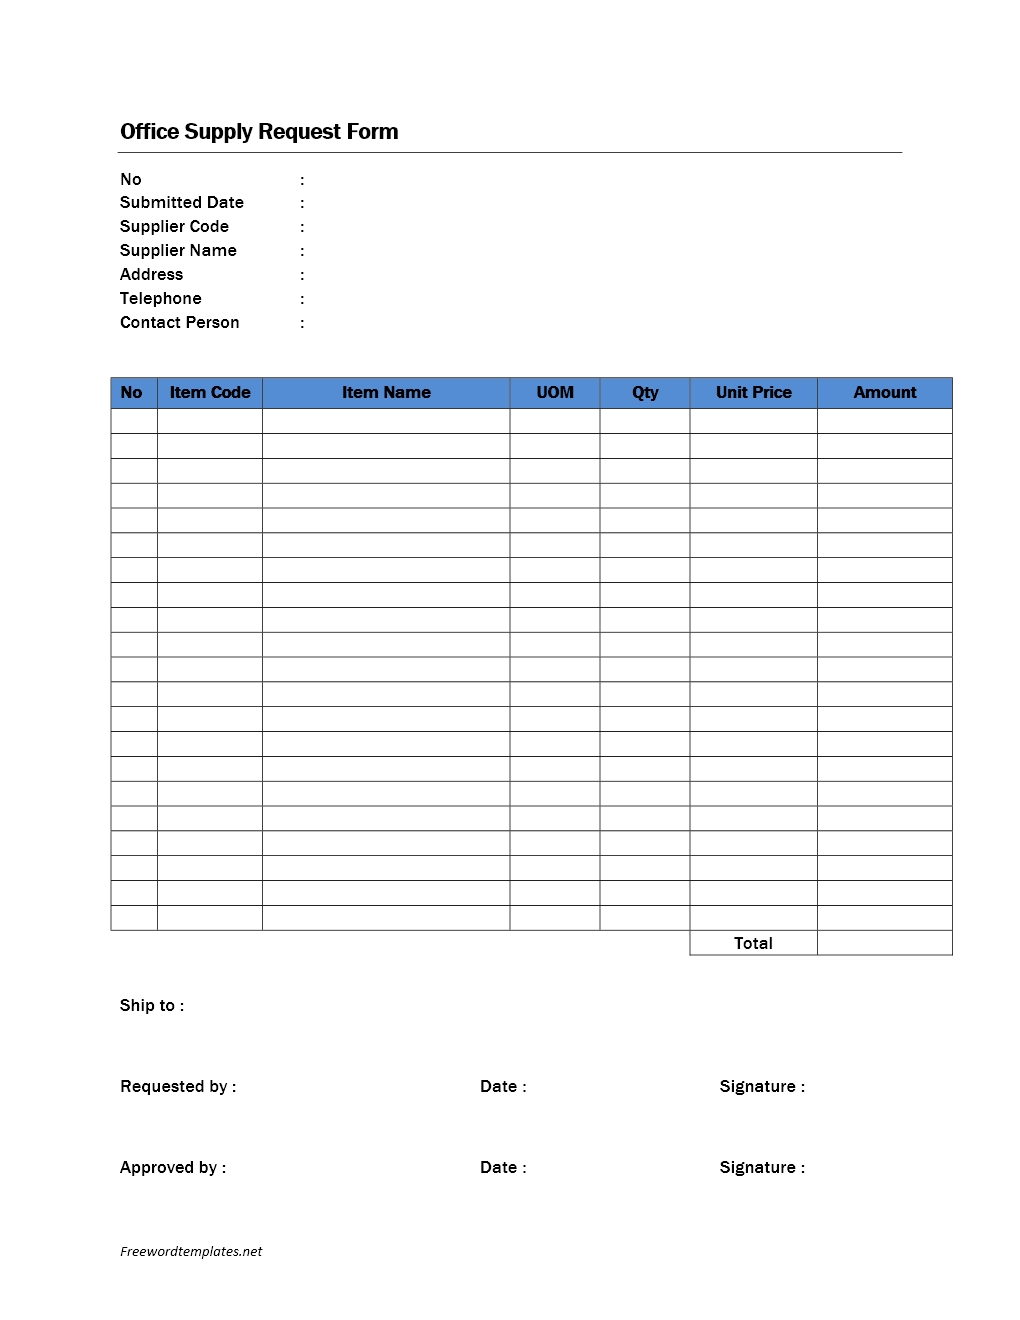 office-supply-request-form